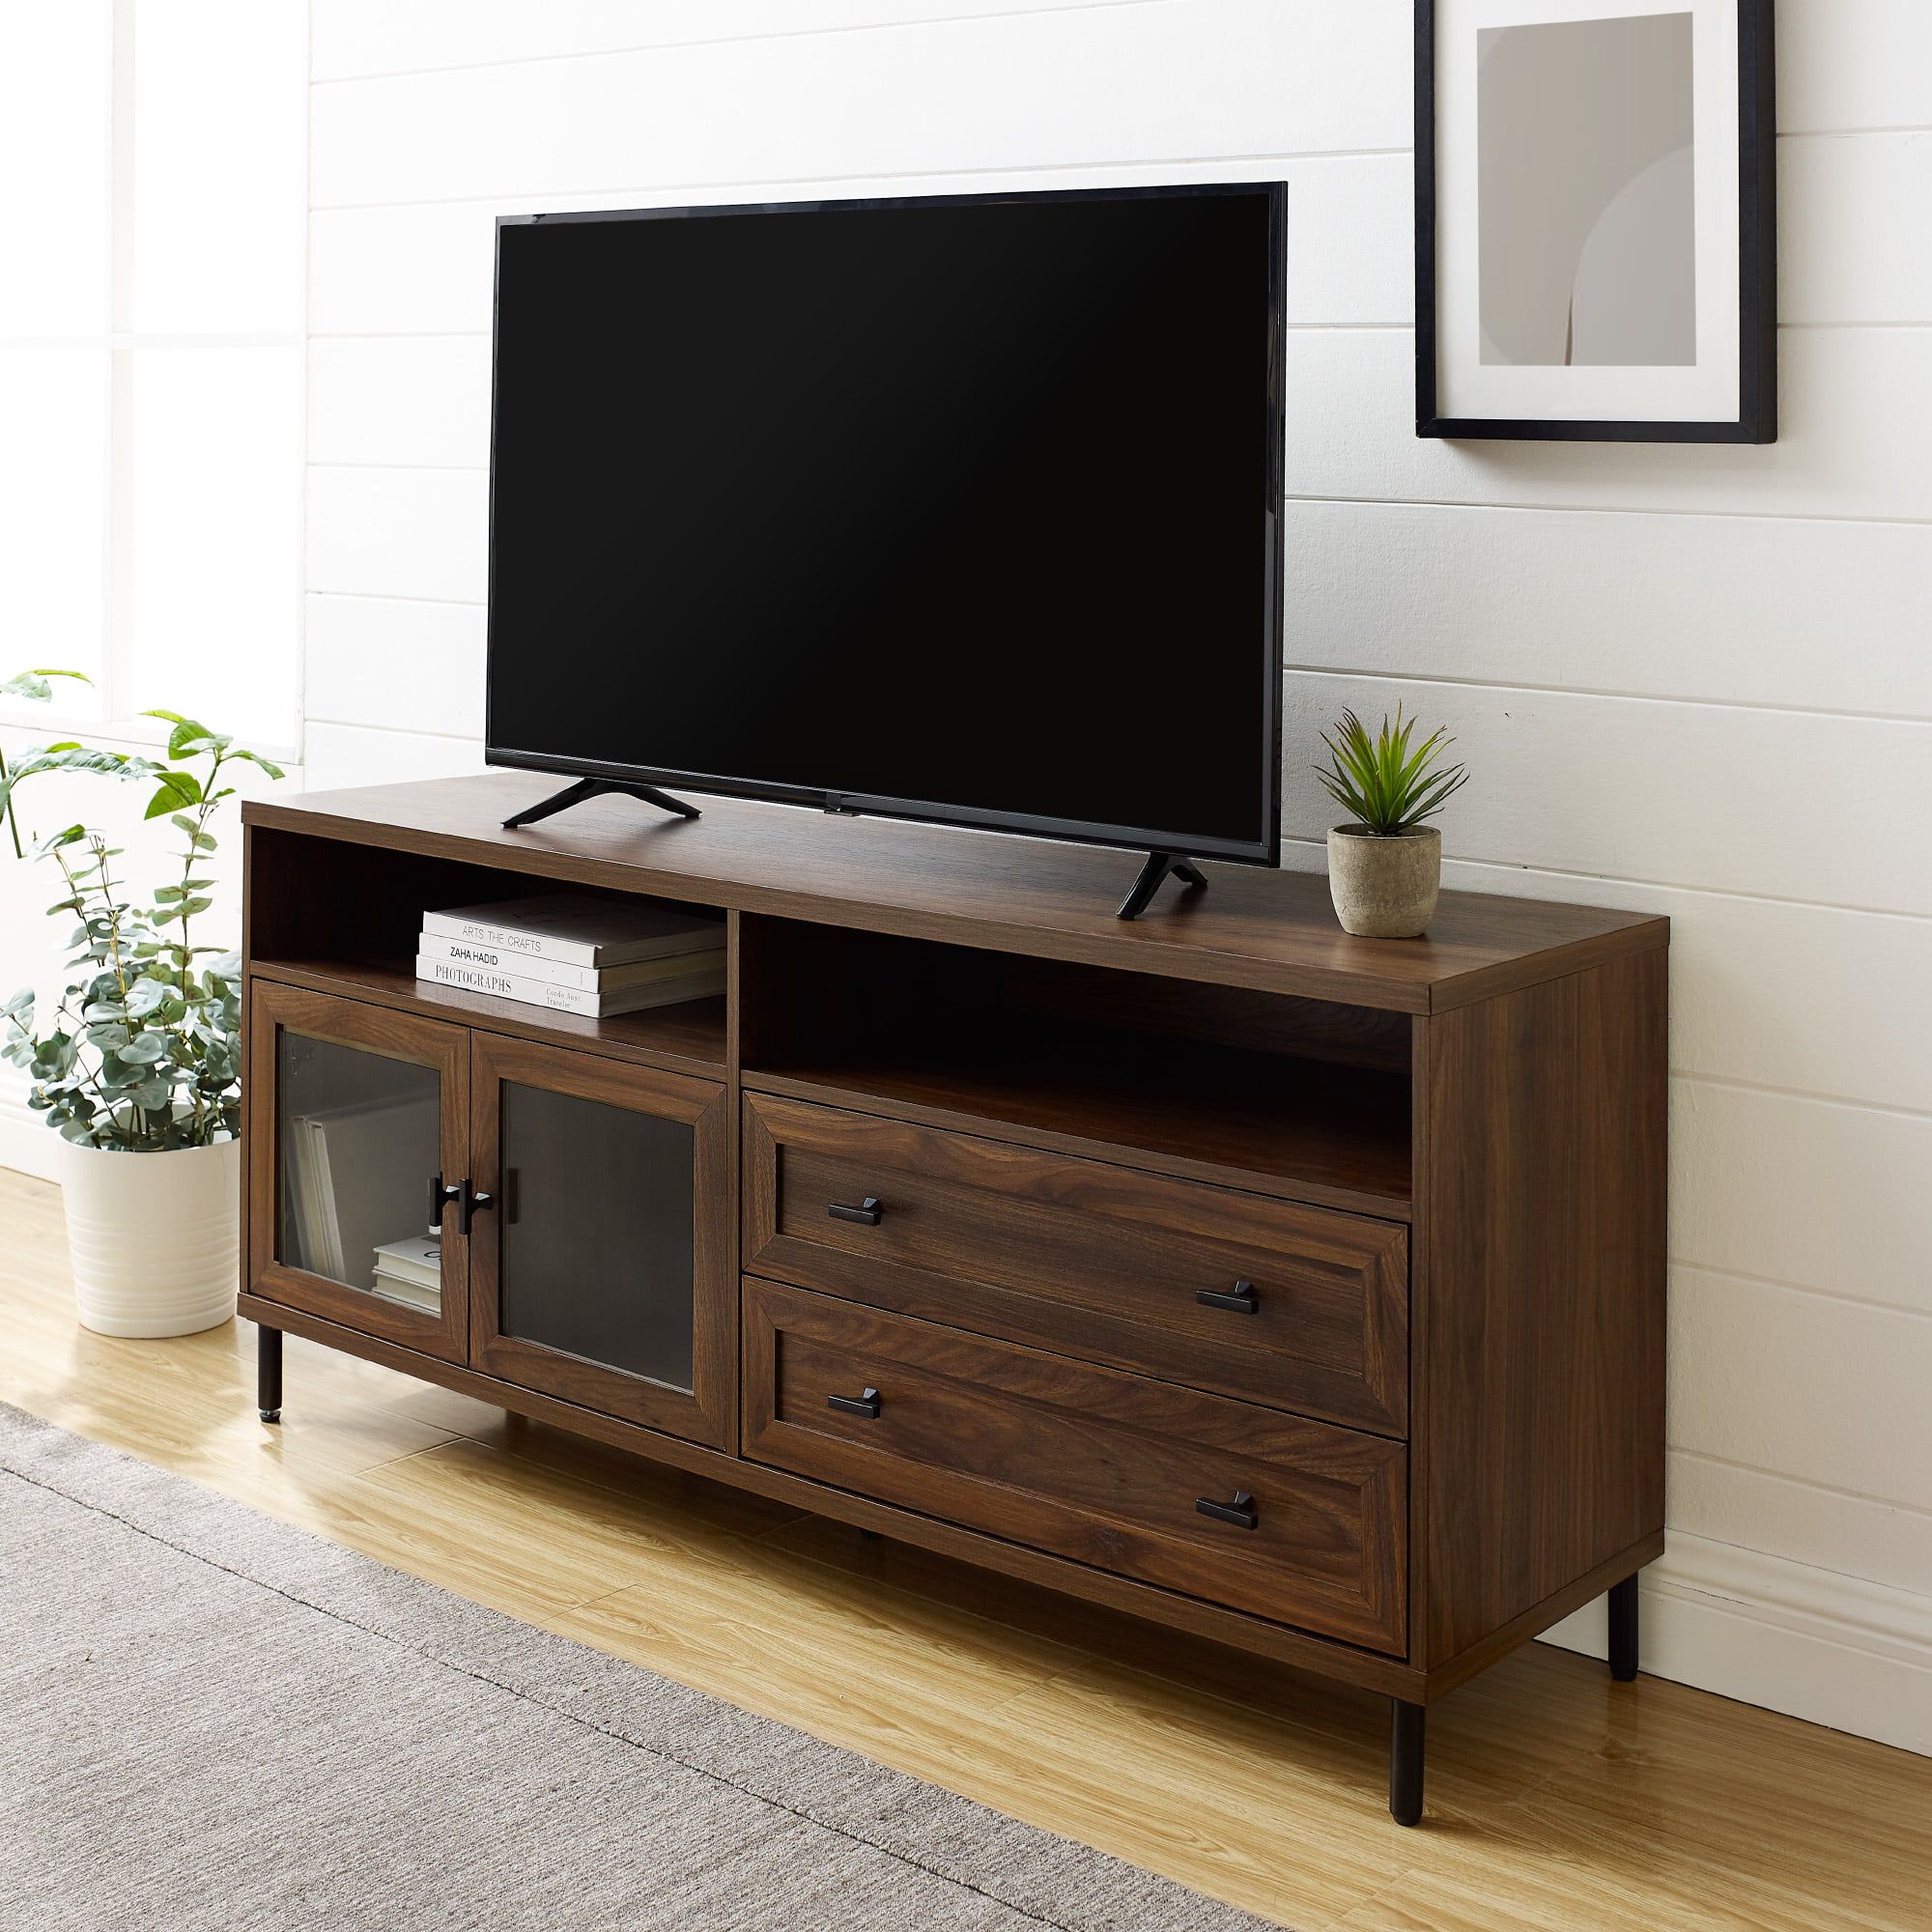 Manor Park Modern Wood And Glass Tv Stand For Tvs Up To 60", Dark Walnut –  Walmart With Regard To Walnut Entertainment Centers (View 9 of 15)